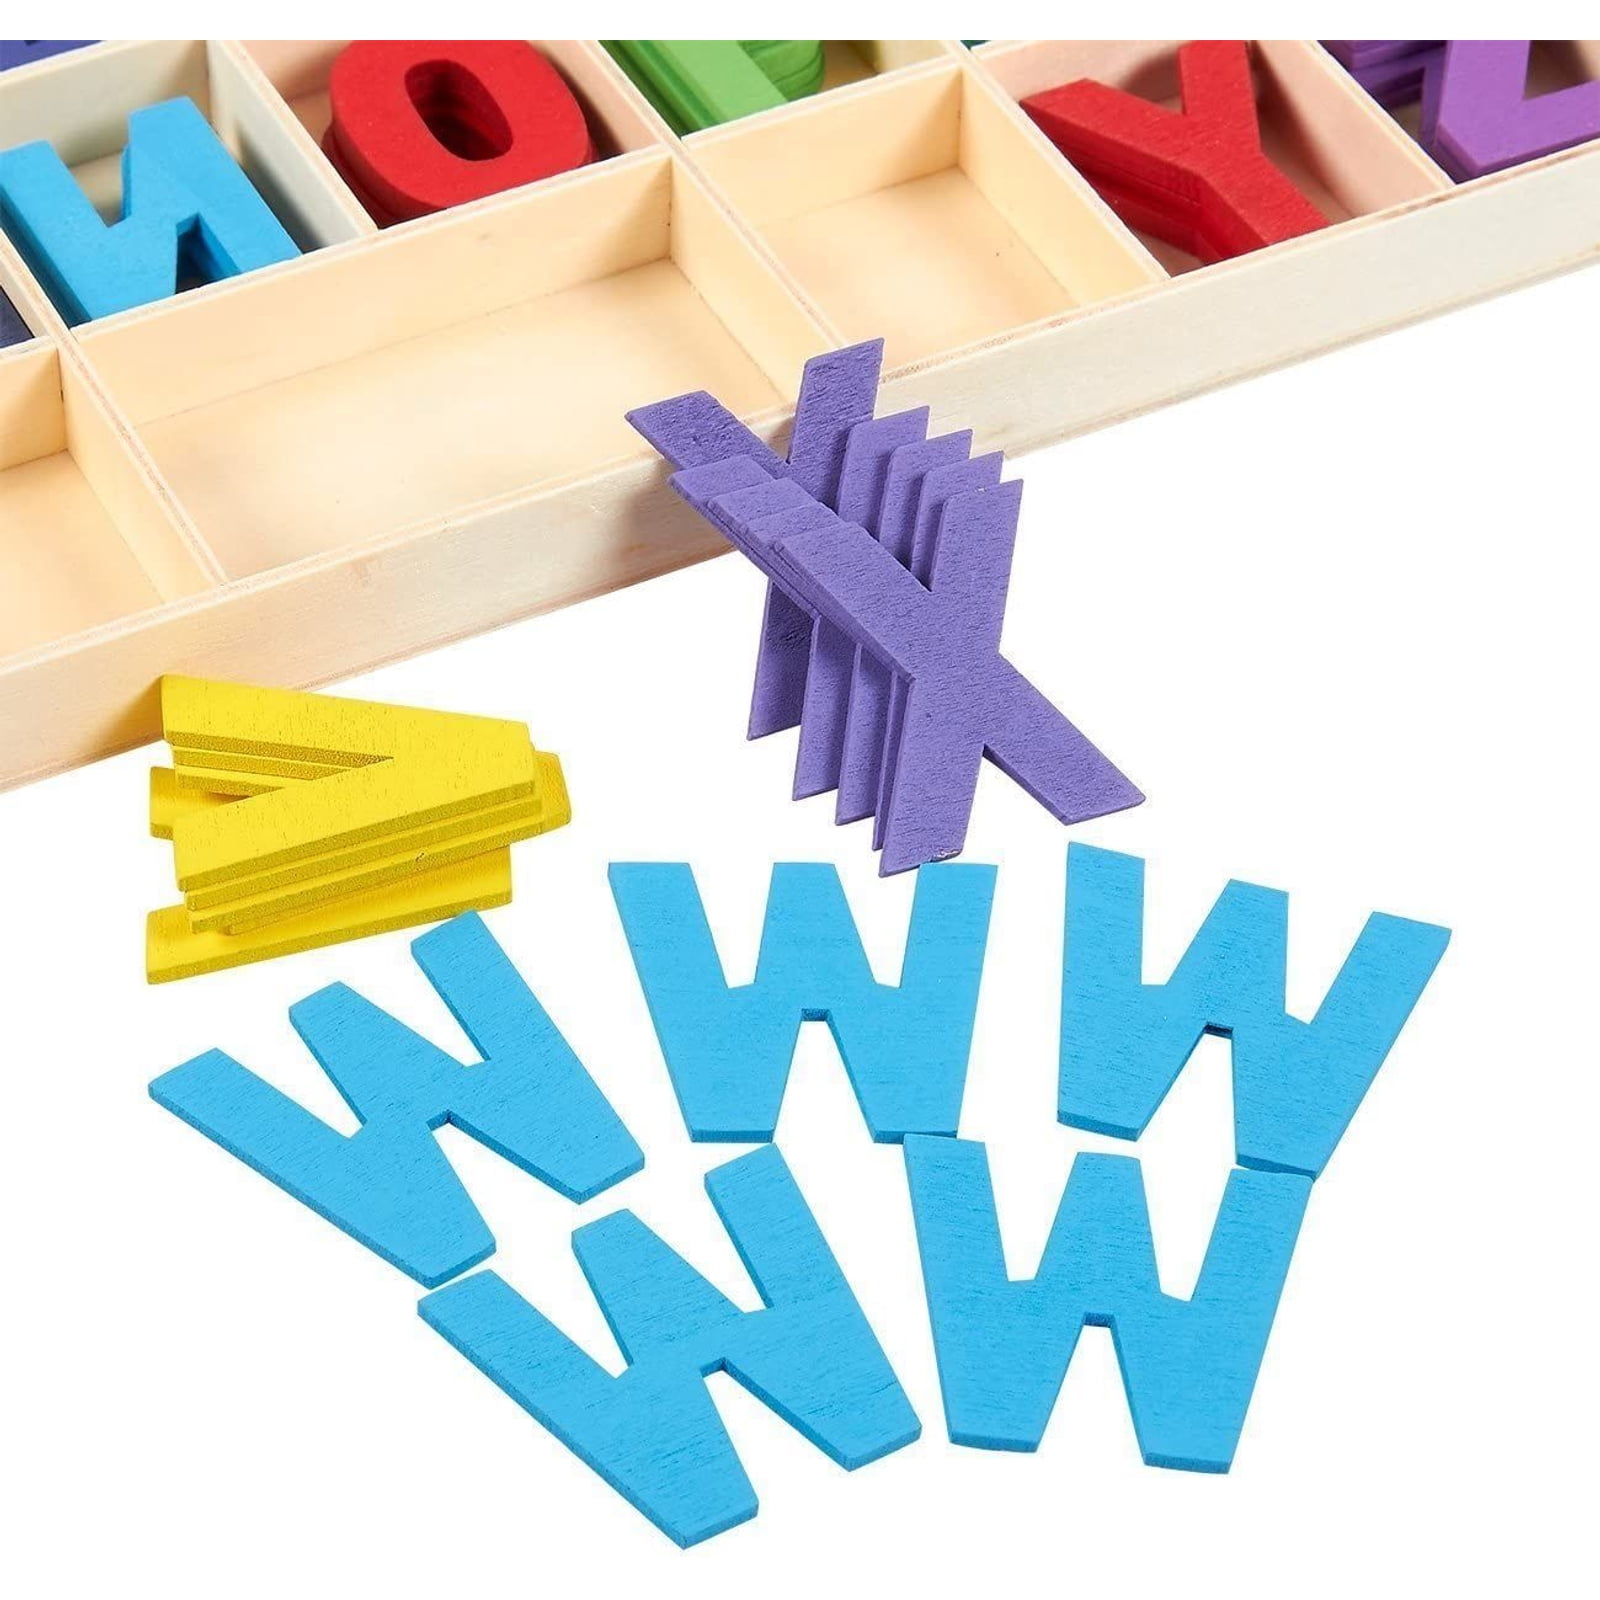 400 Wood Craft Alphabet Wooden Letters Numbers Kids Educational Learning Set 